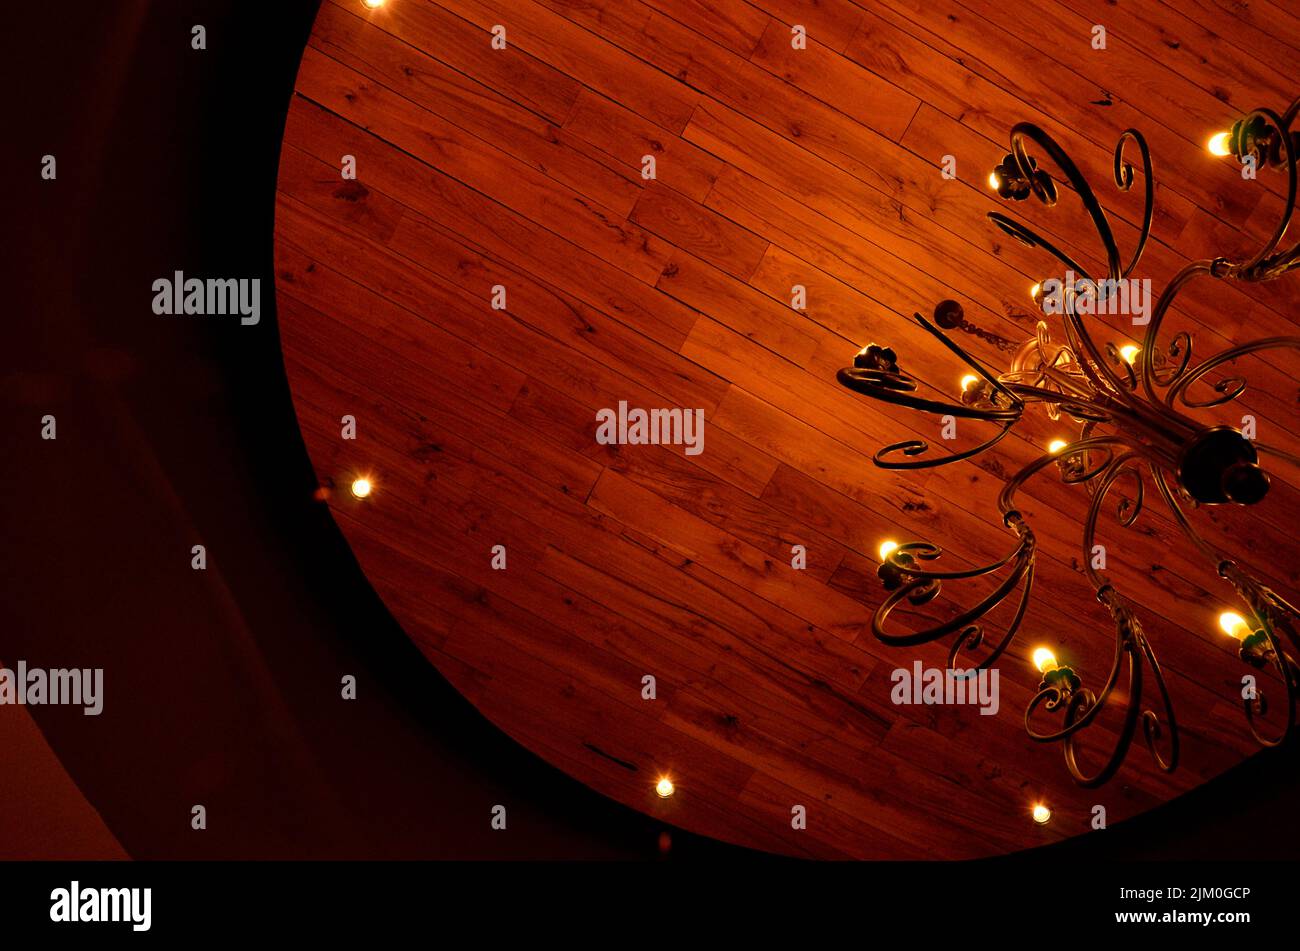 A low-angle shot of a lit chandelier hanging on a wooden ceiling Stock Photo